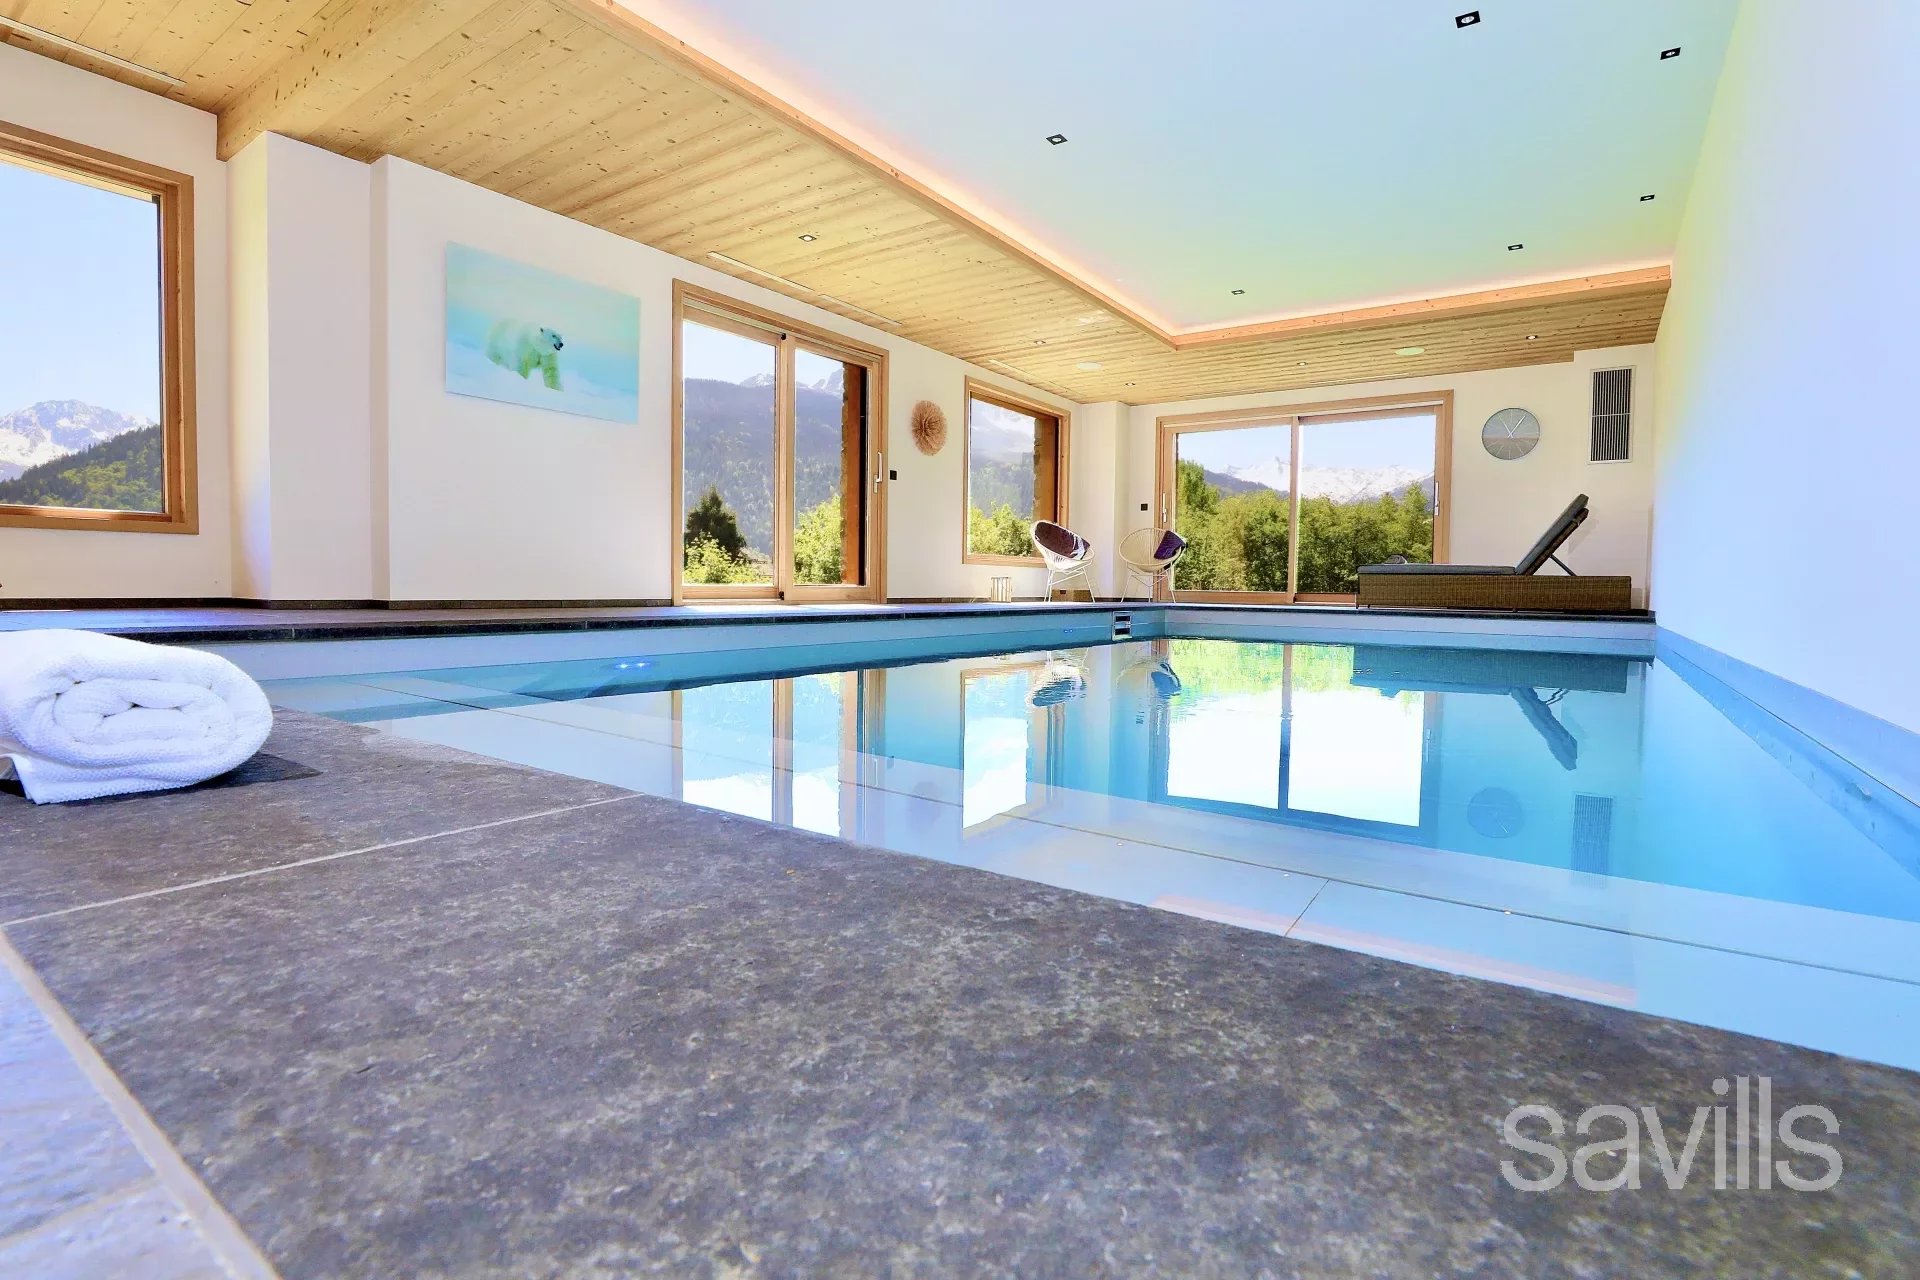 Newly built luxury chalet of 483 sq m with swimming pool and south facing terrace.